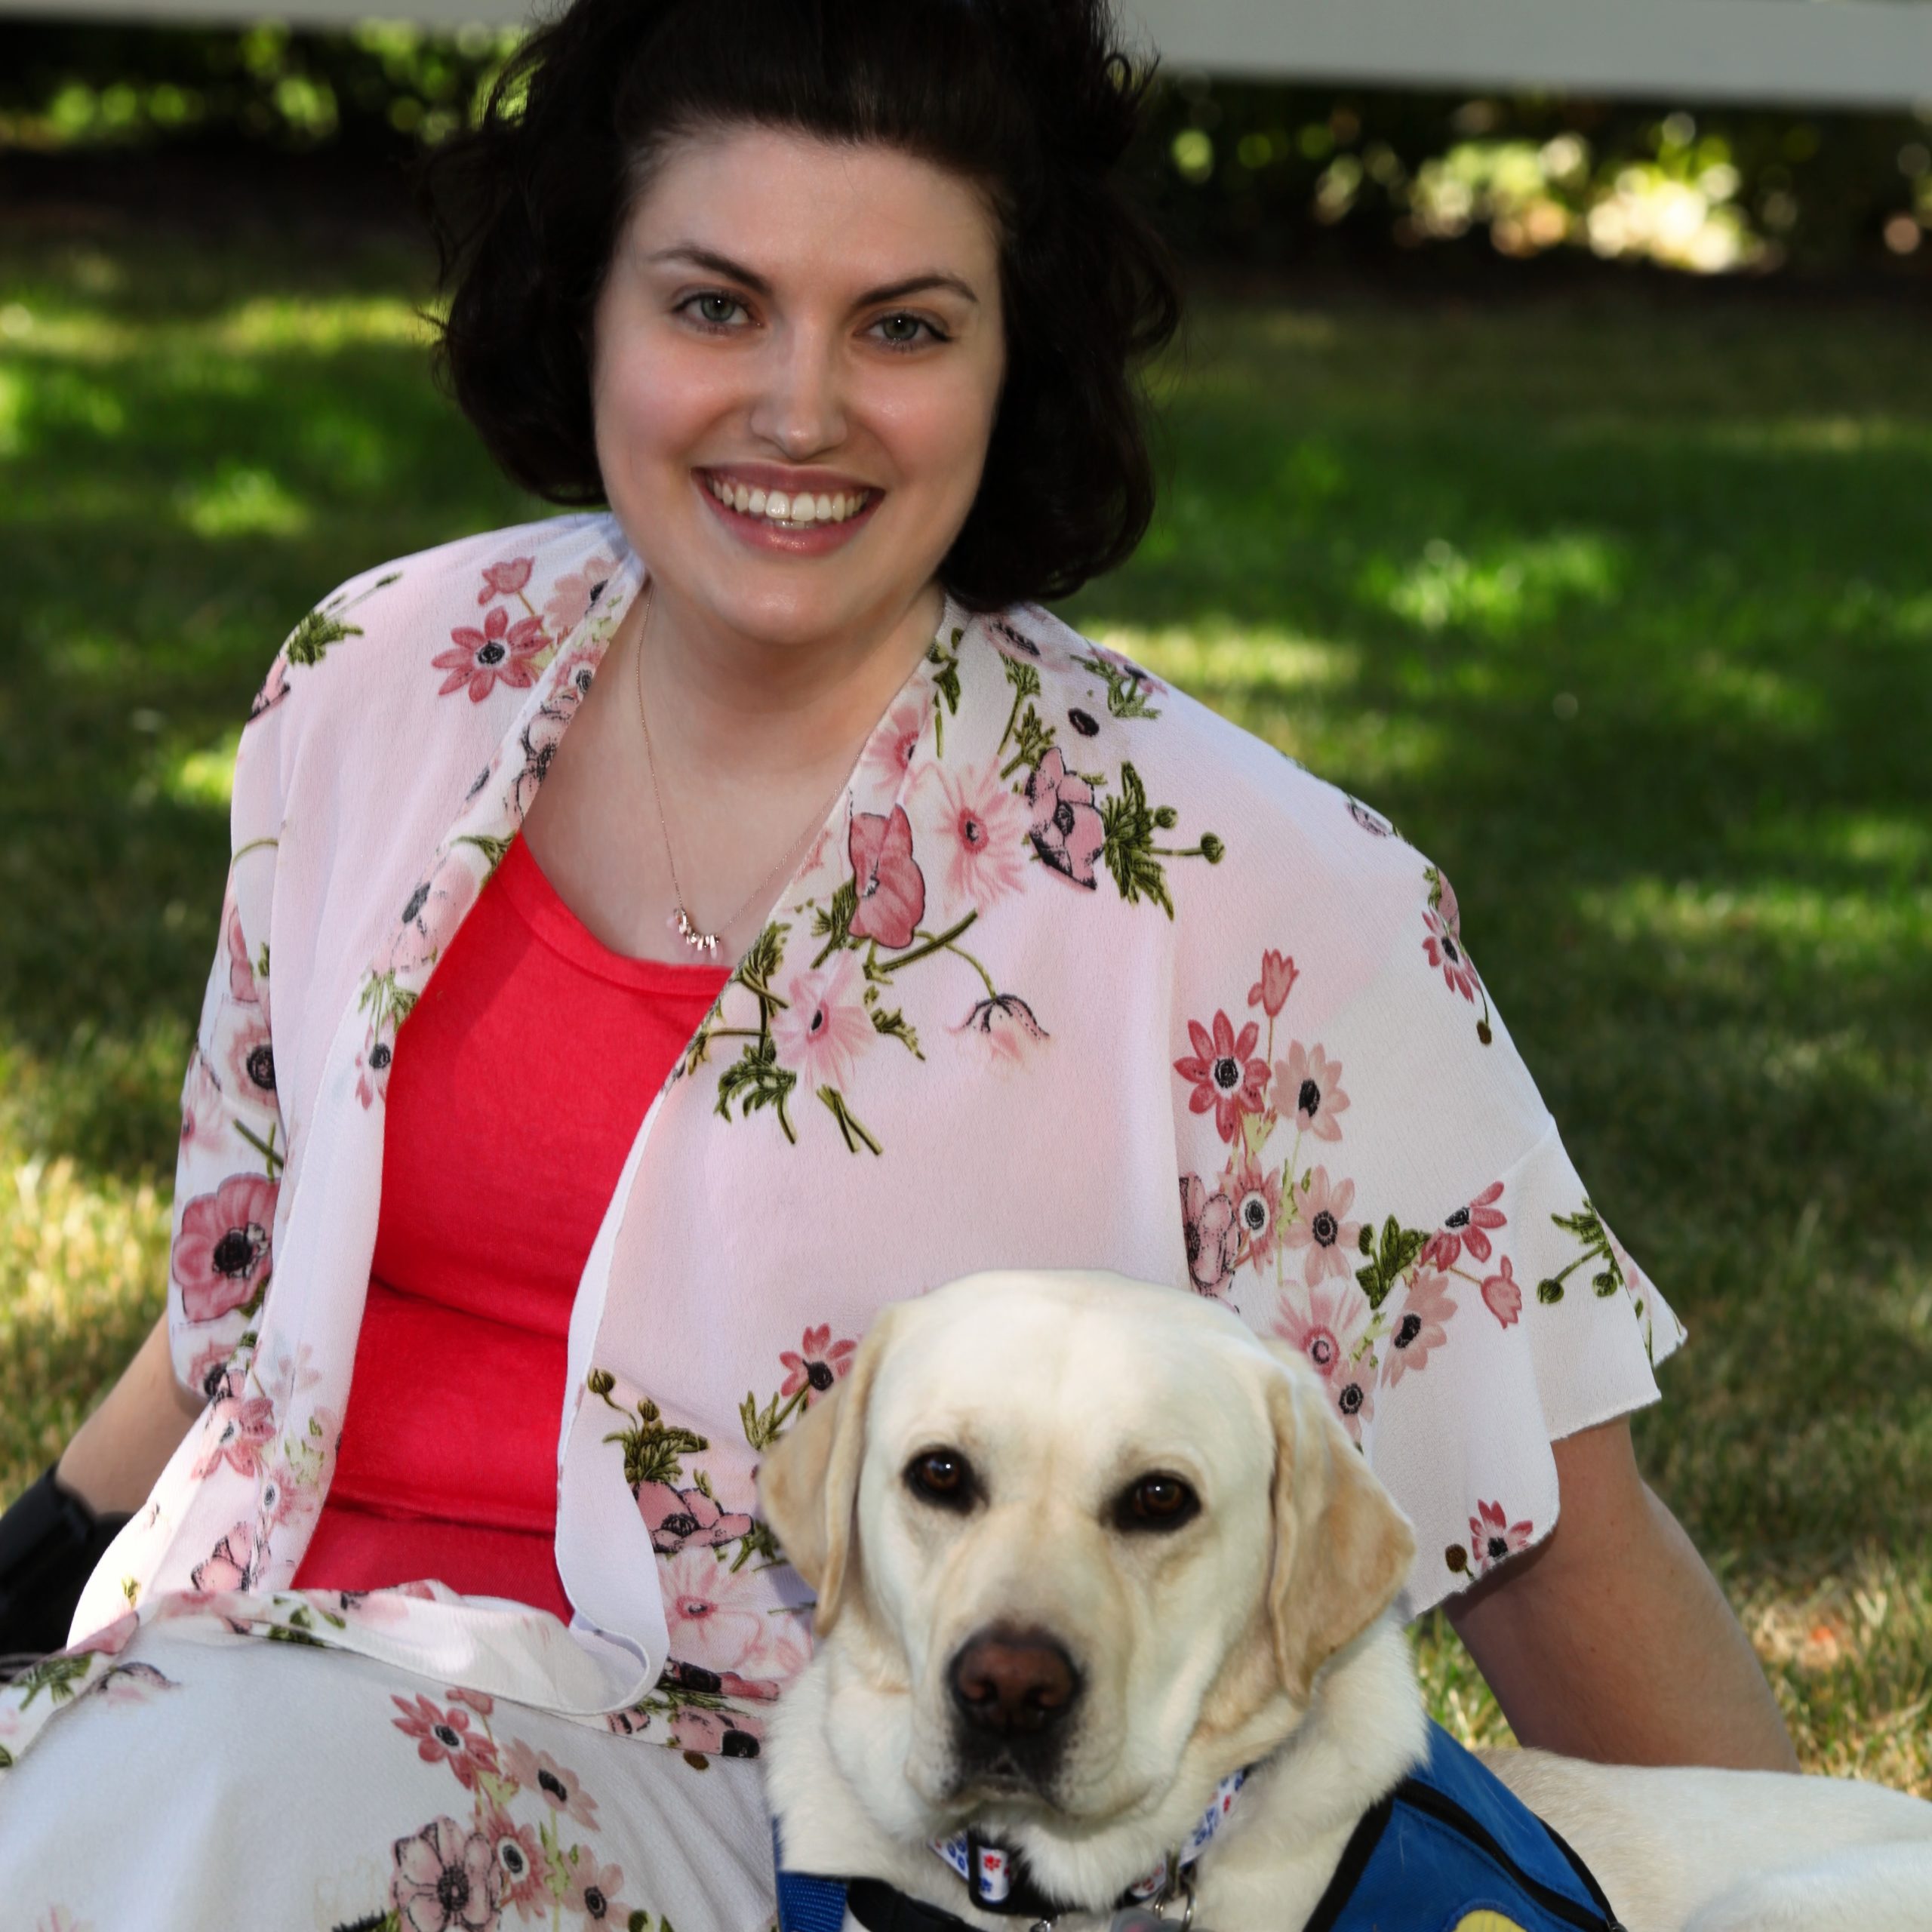 Volunteer and graduate Lacee Clinger with her yellow hearing dog, Rhenny